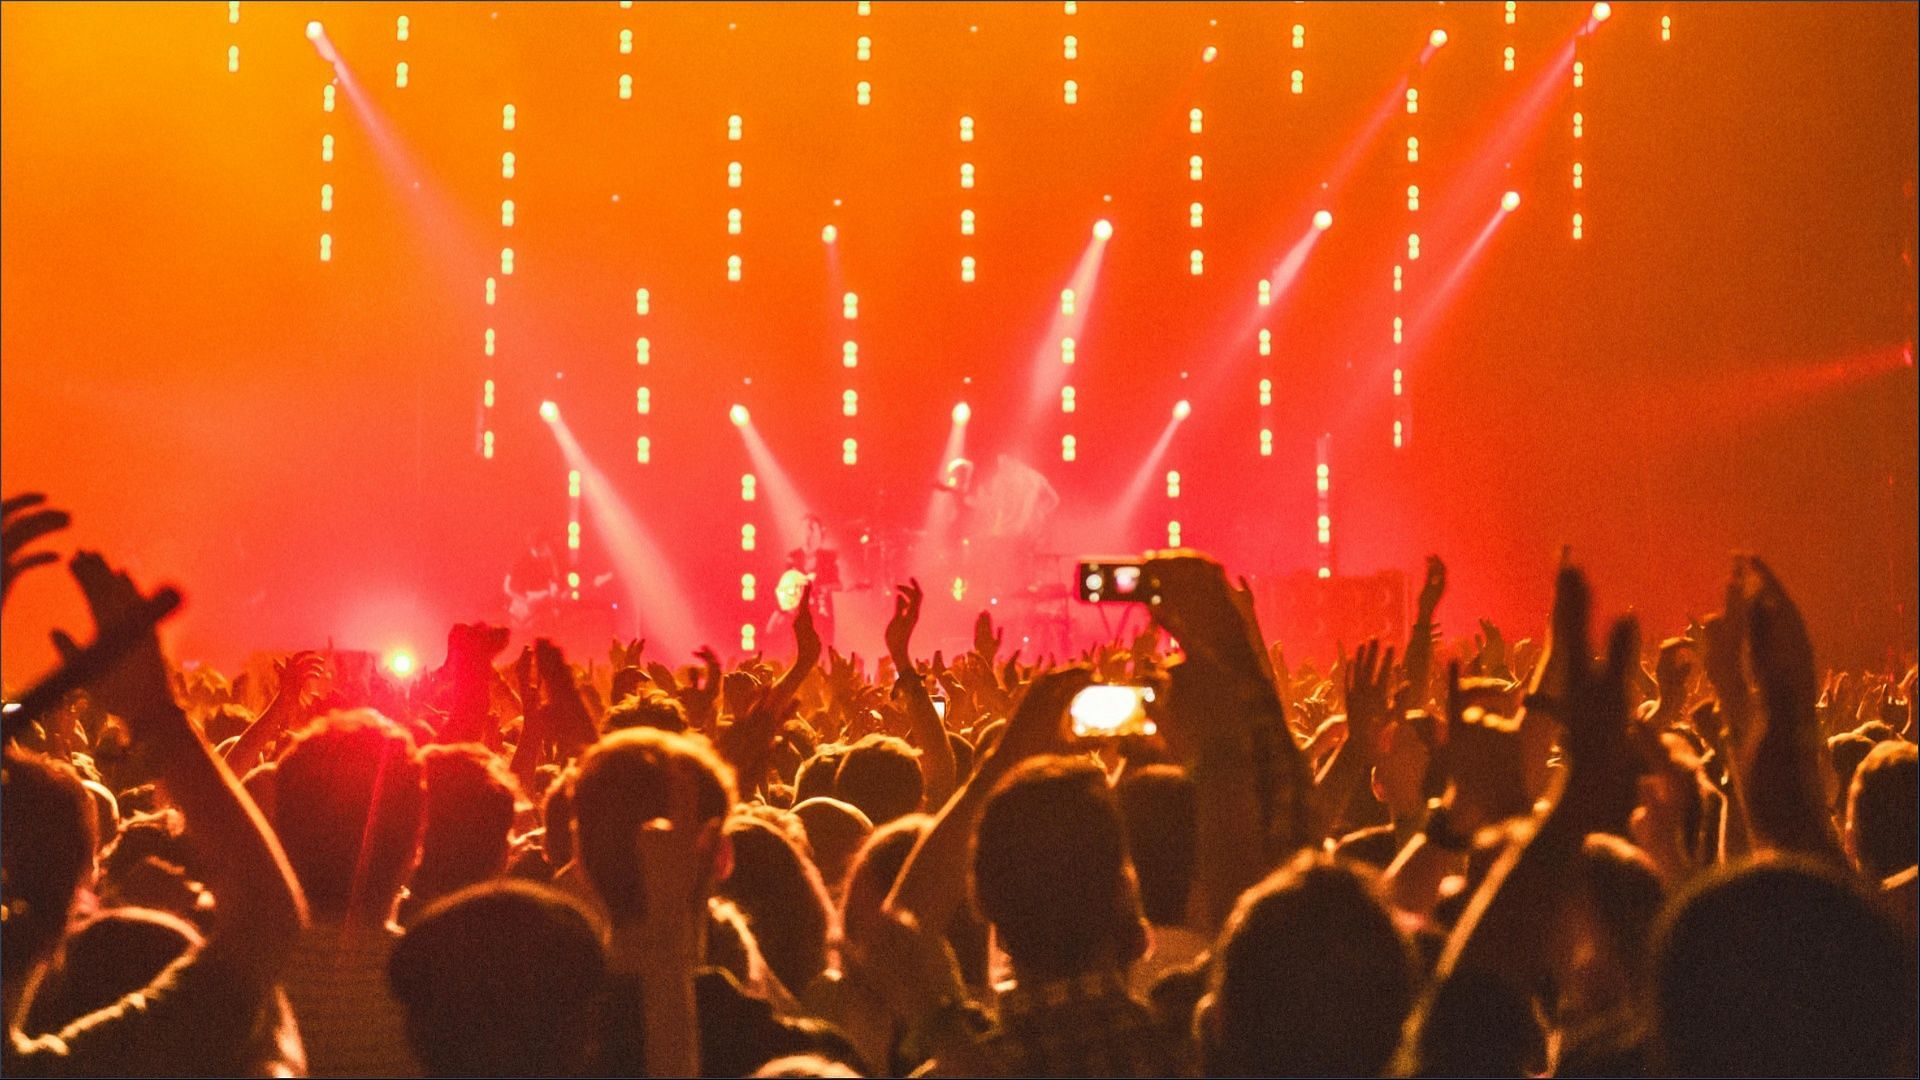 The Pandemonium Rocks music festival was affected by a data breach from an error in refund forms (Image via Anna-m. w. / Pexels)